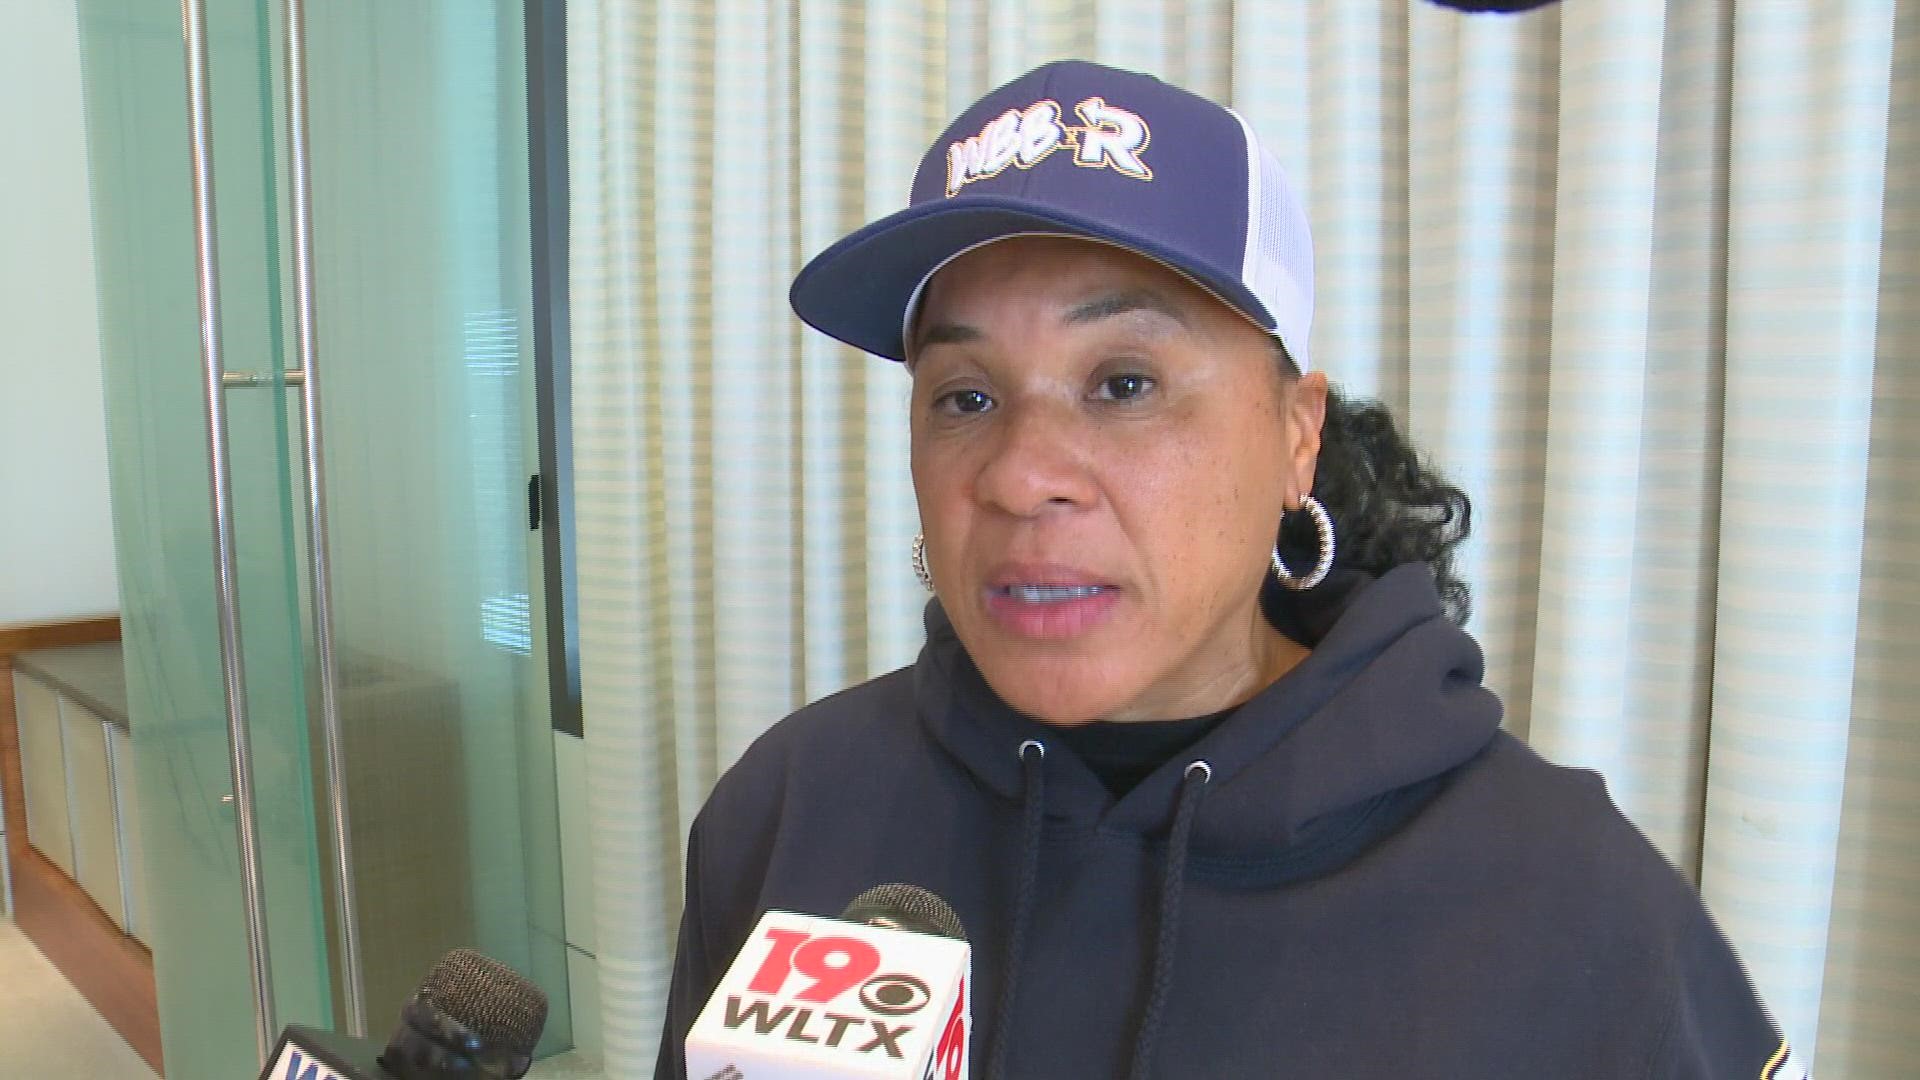 We know who #DawnStaley is rooting for in the Super Bowl 👀 #southcaro